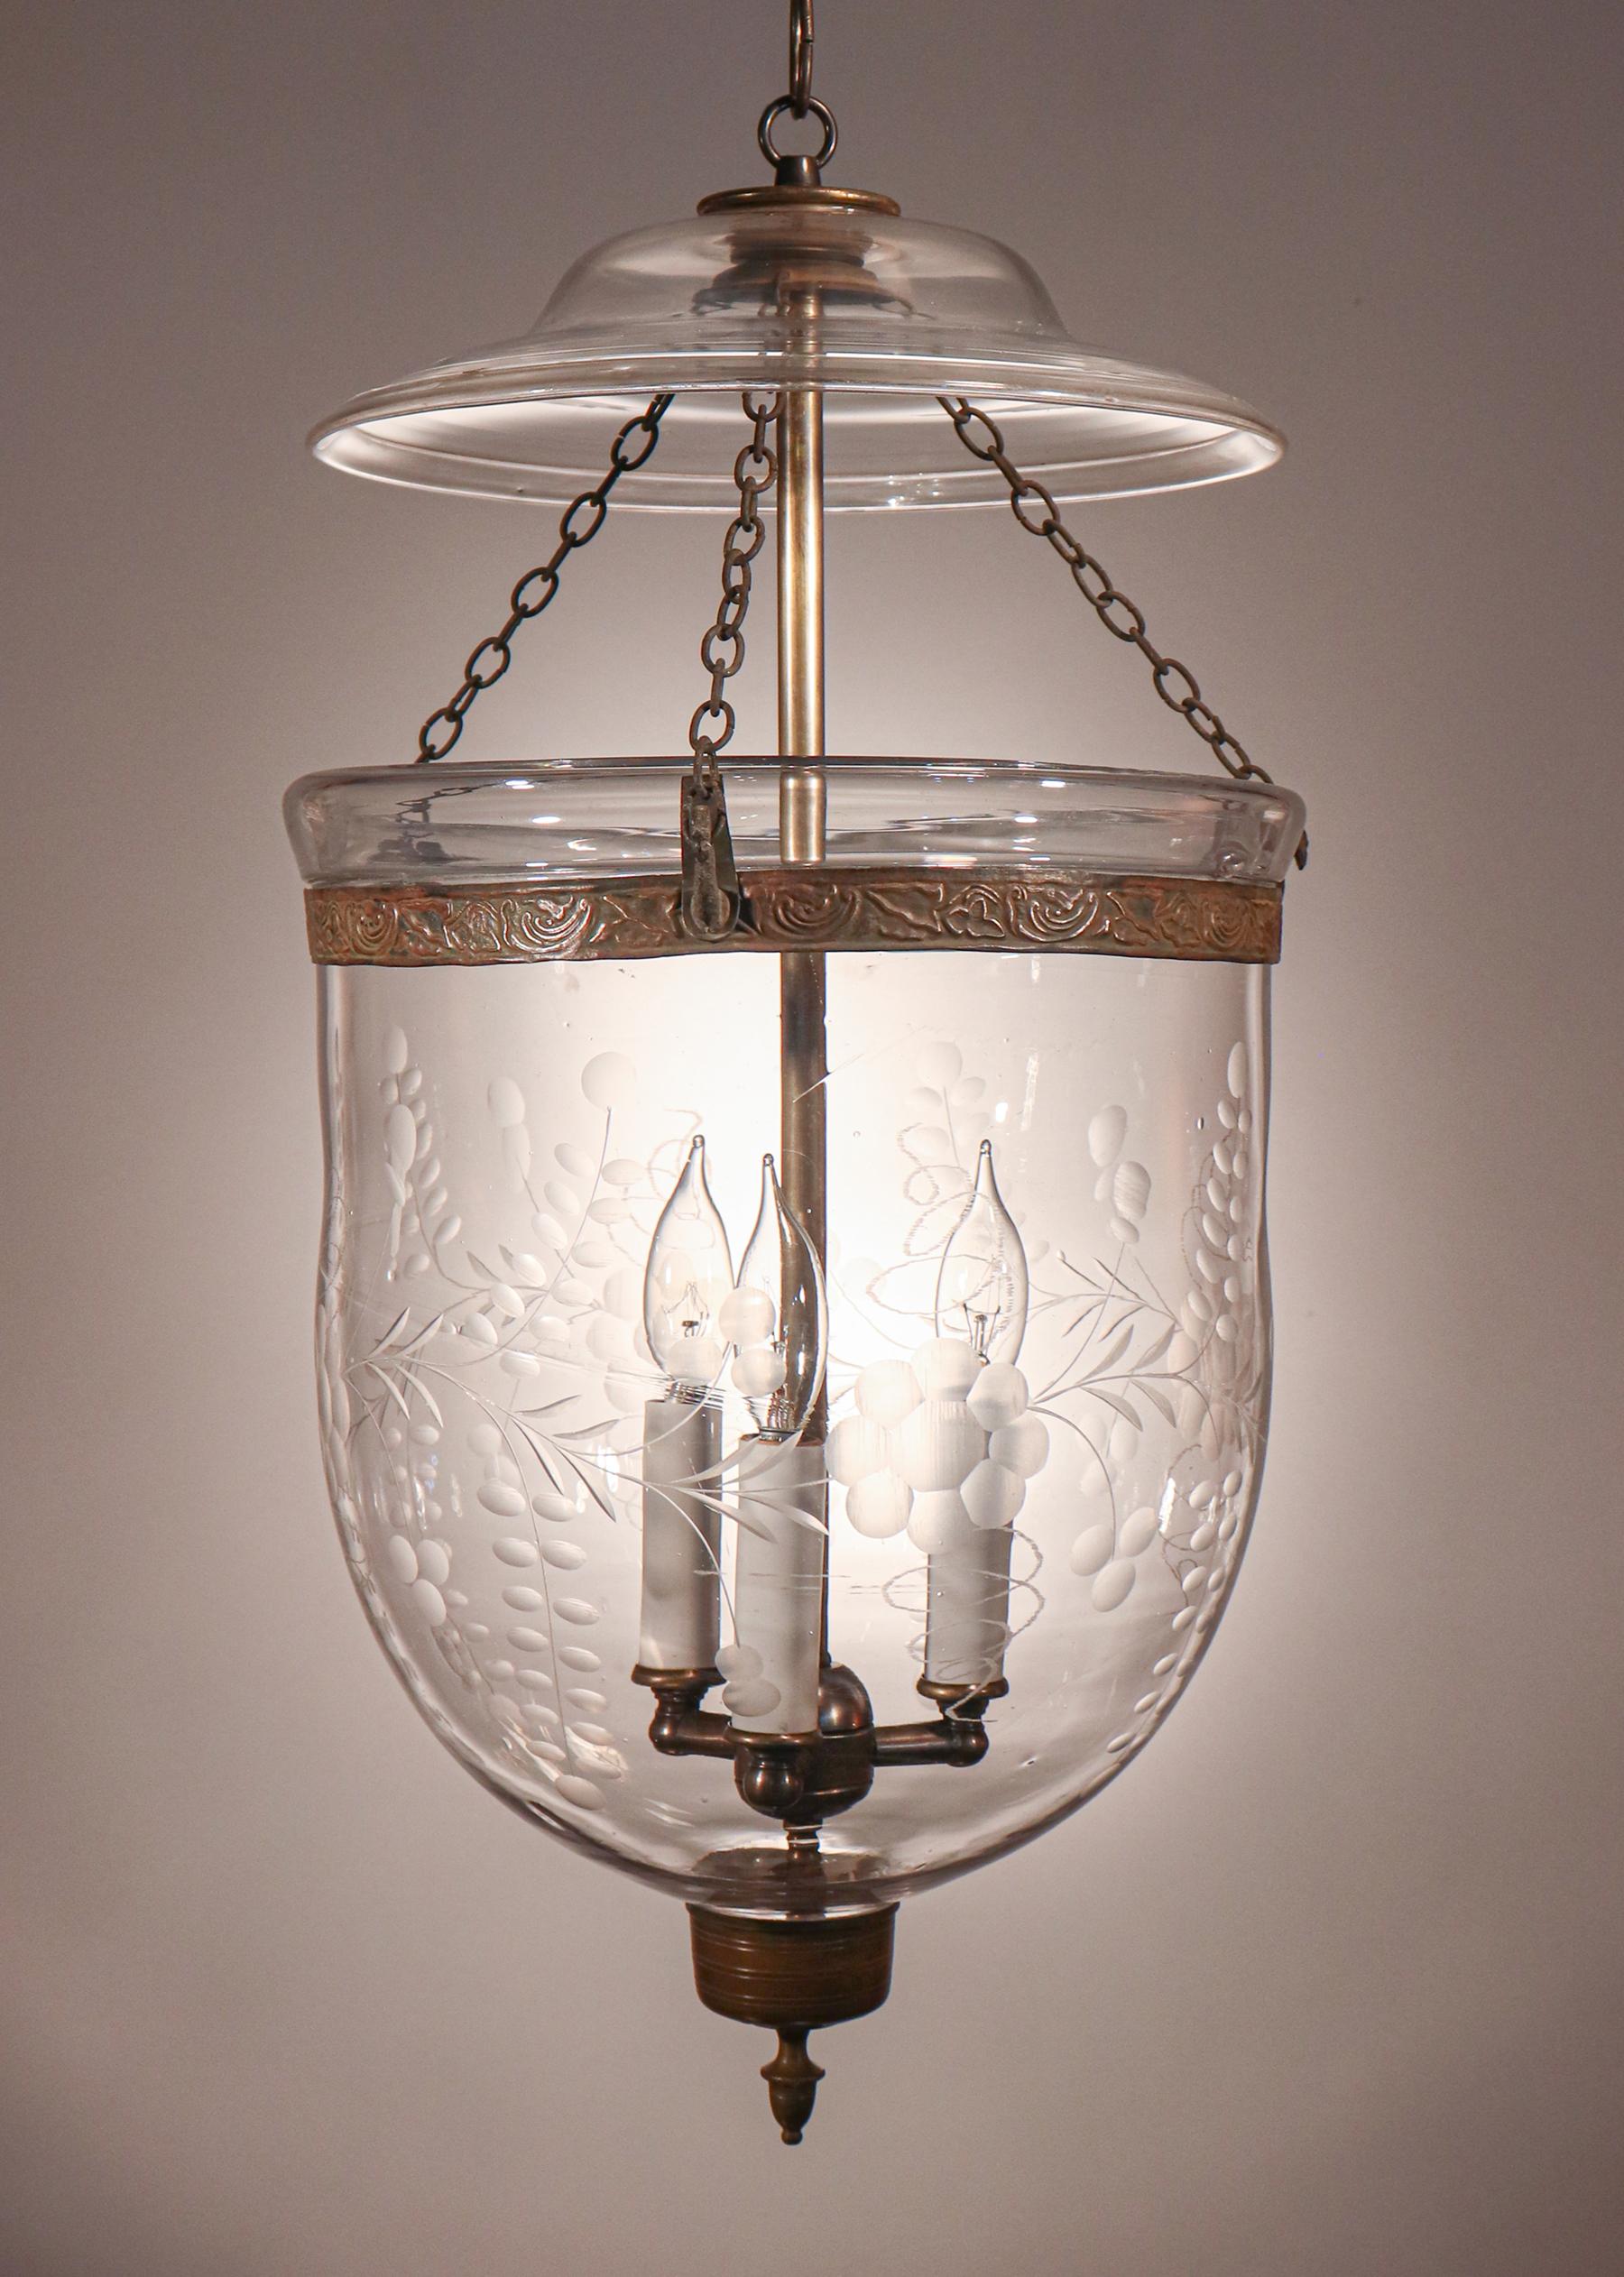 An antique English bell jar lantern with beautiful form and very good quality hand blown glass This circa 1870 pendant, which has a finely etched floral motif, features all-original fittings with the exception of its brass finial/candle holder base,